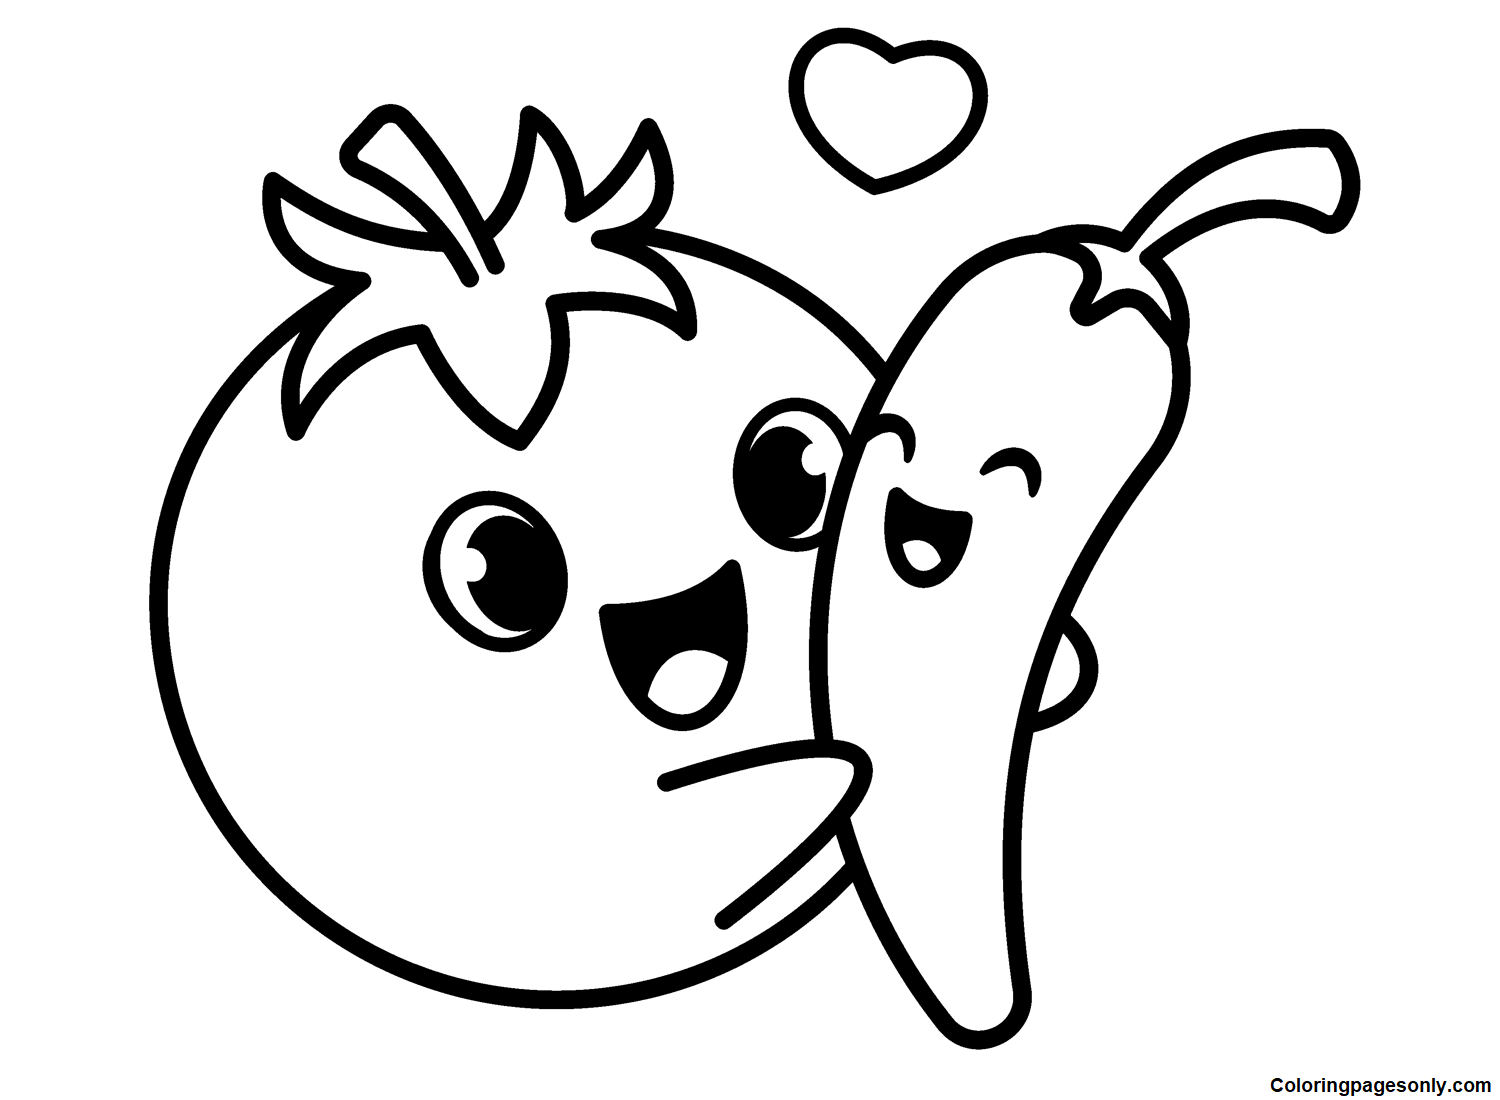 Cute Tomato hug Chili Couple Cartoon Coloring Pages